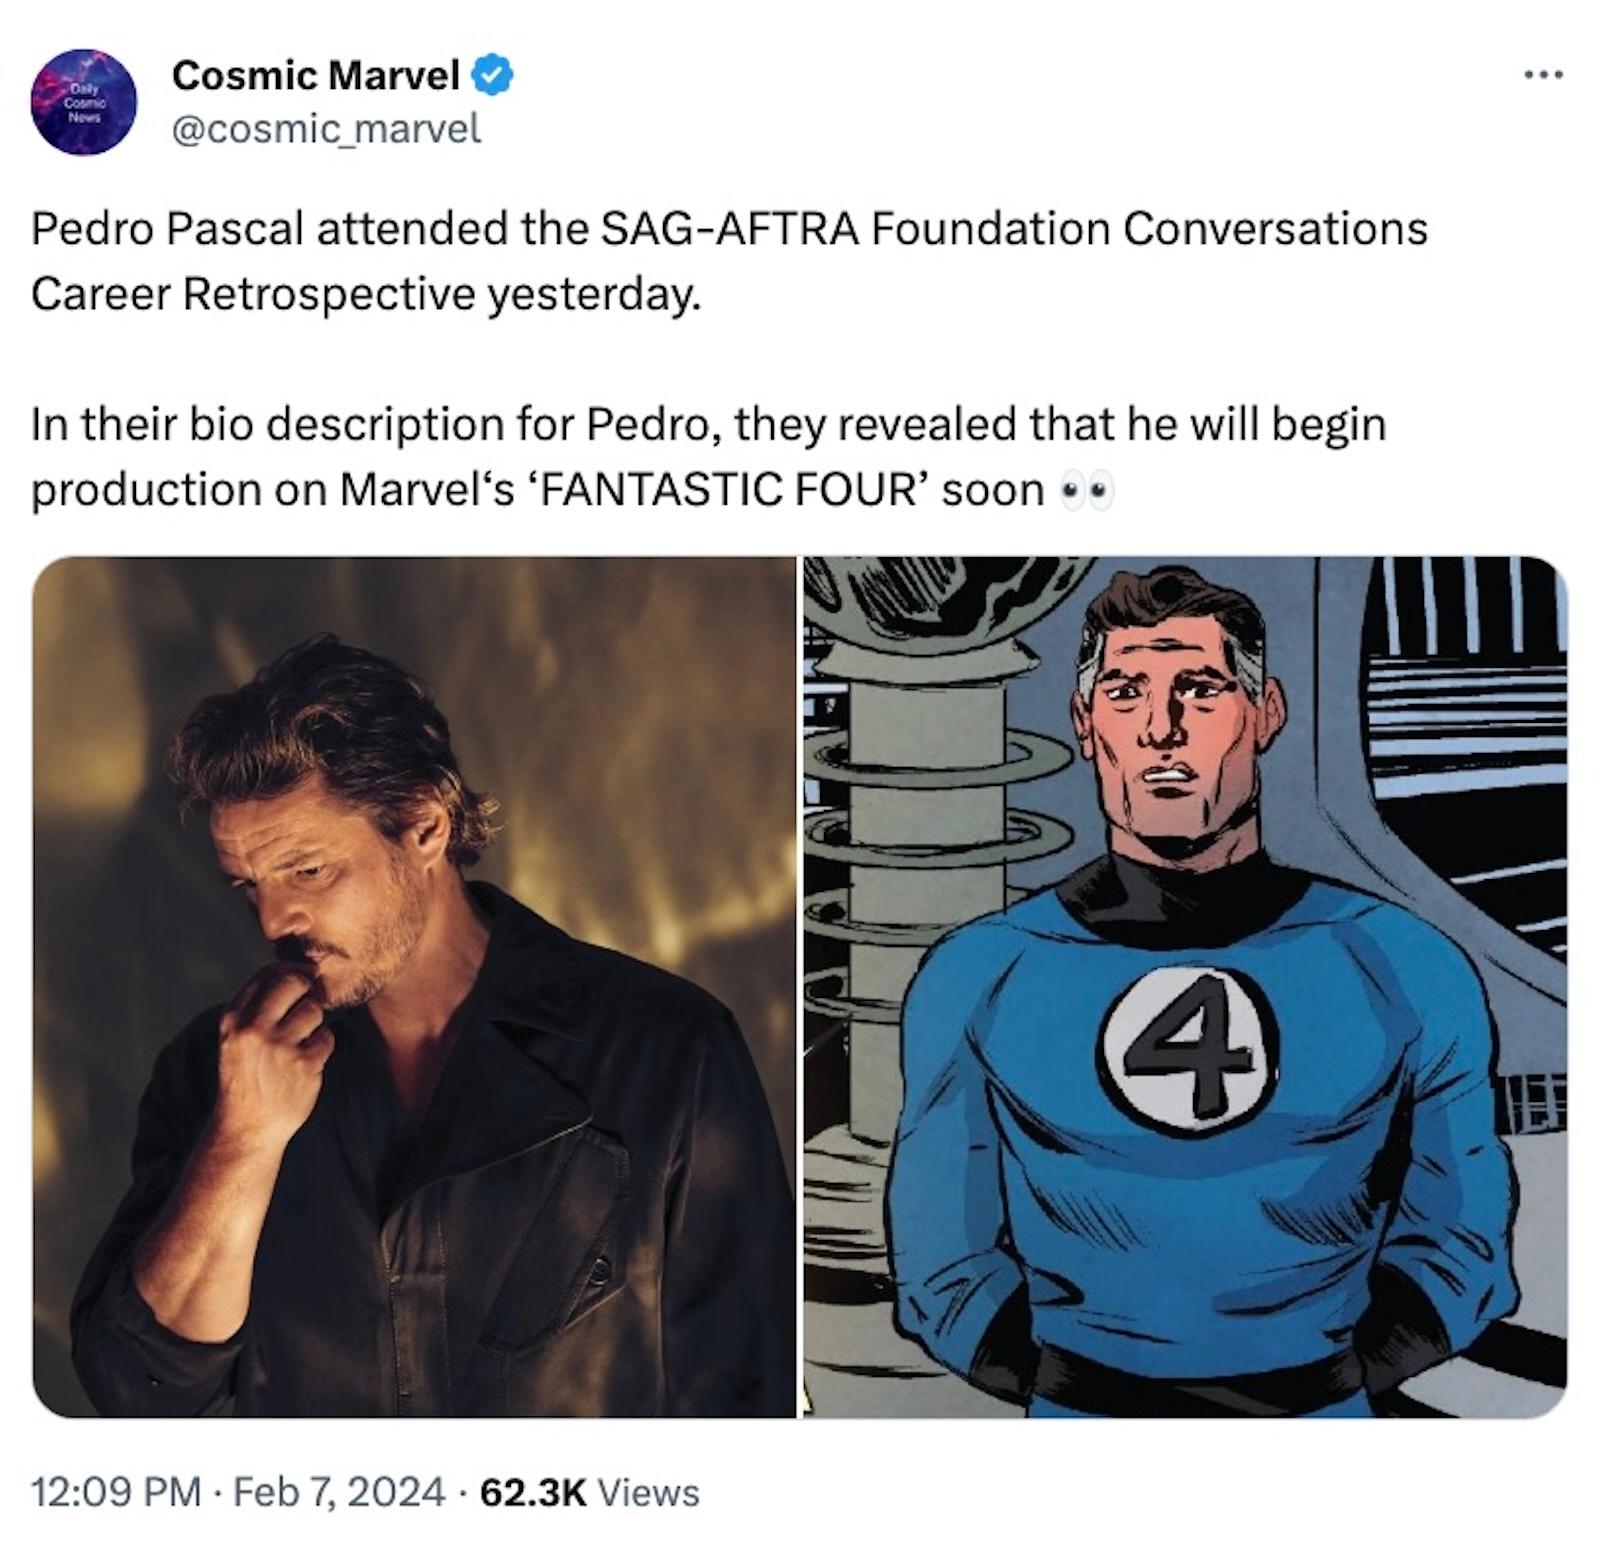 Tweet about Pedro Pascal being cast in the MCU's Fantastic Four movie